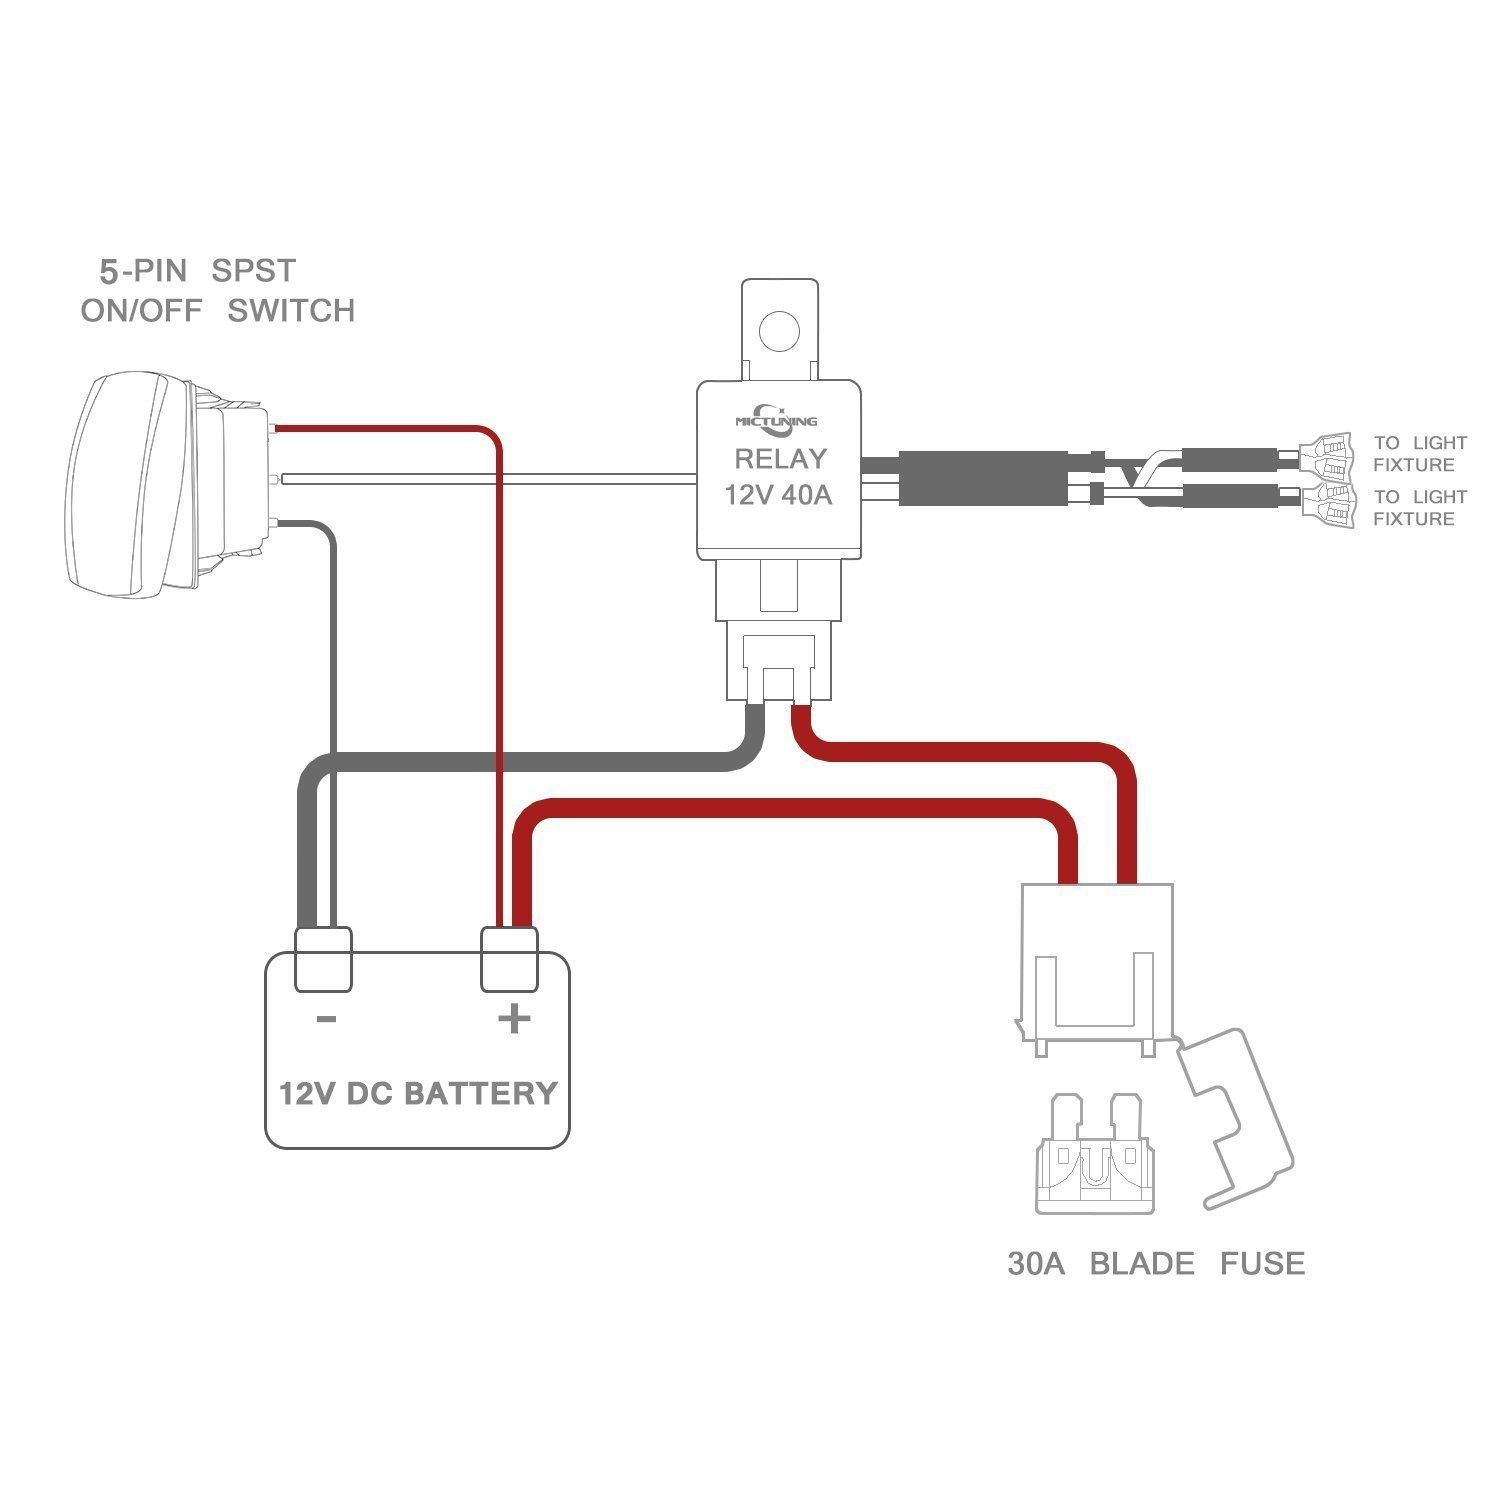 Led Jeep Light Switch Wiring Diagram - Data Wiring Diagram Schematic - Led Light Bar Wiring Diagram